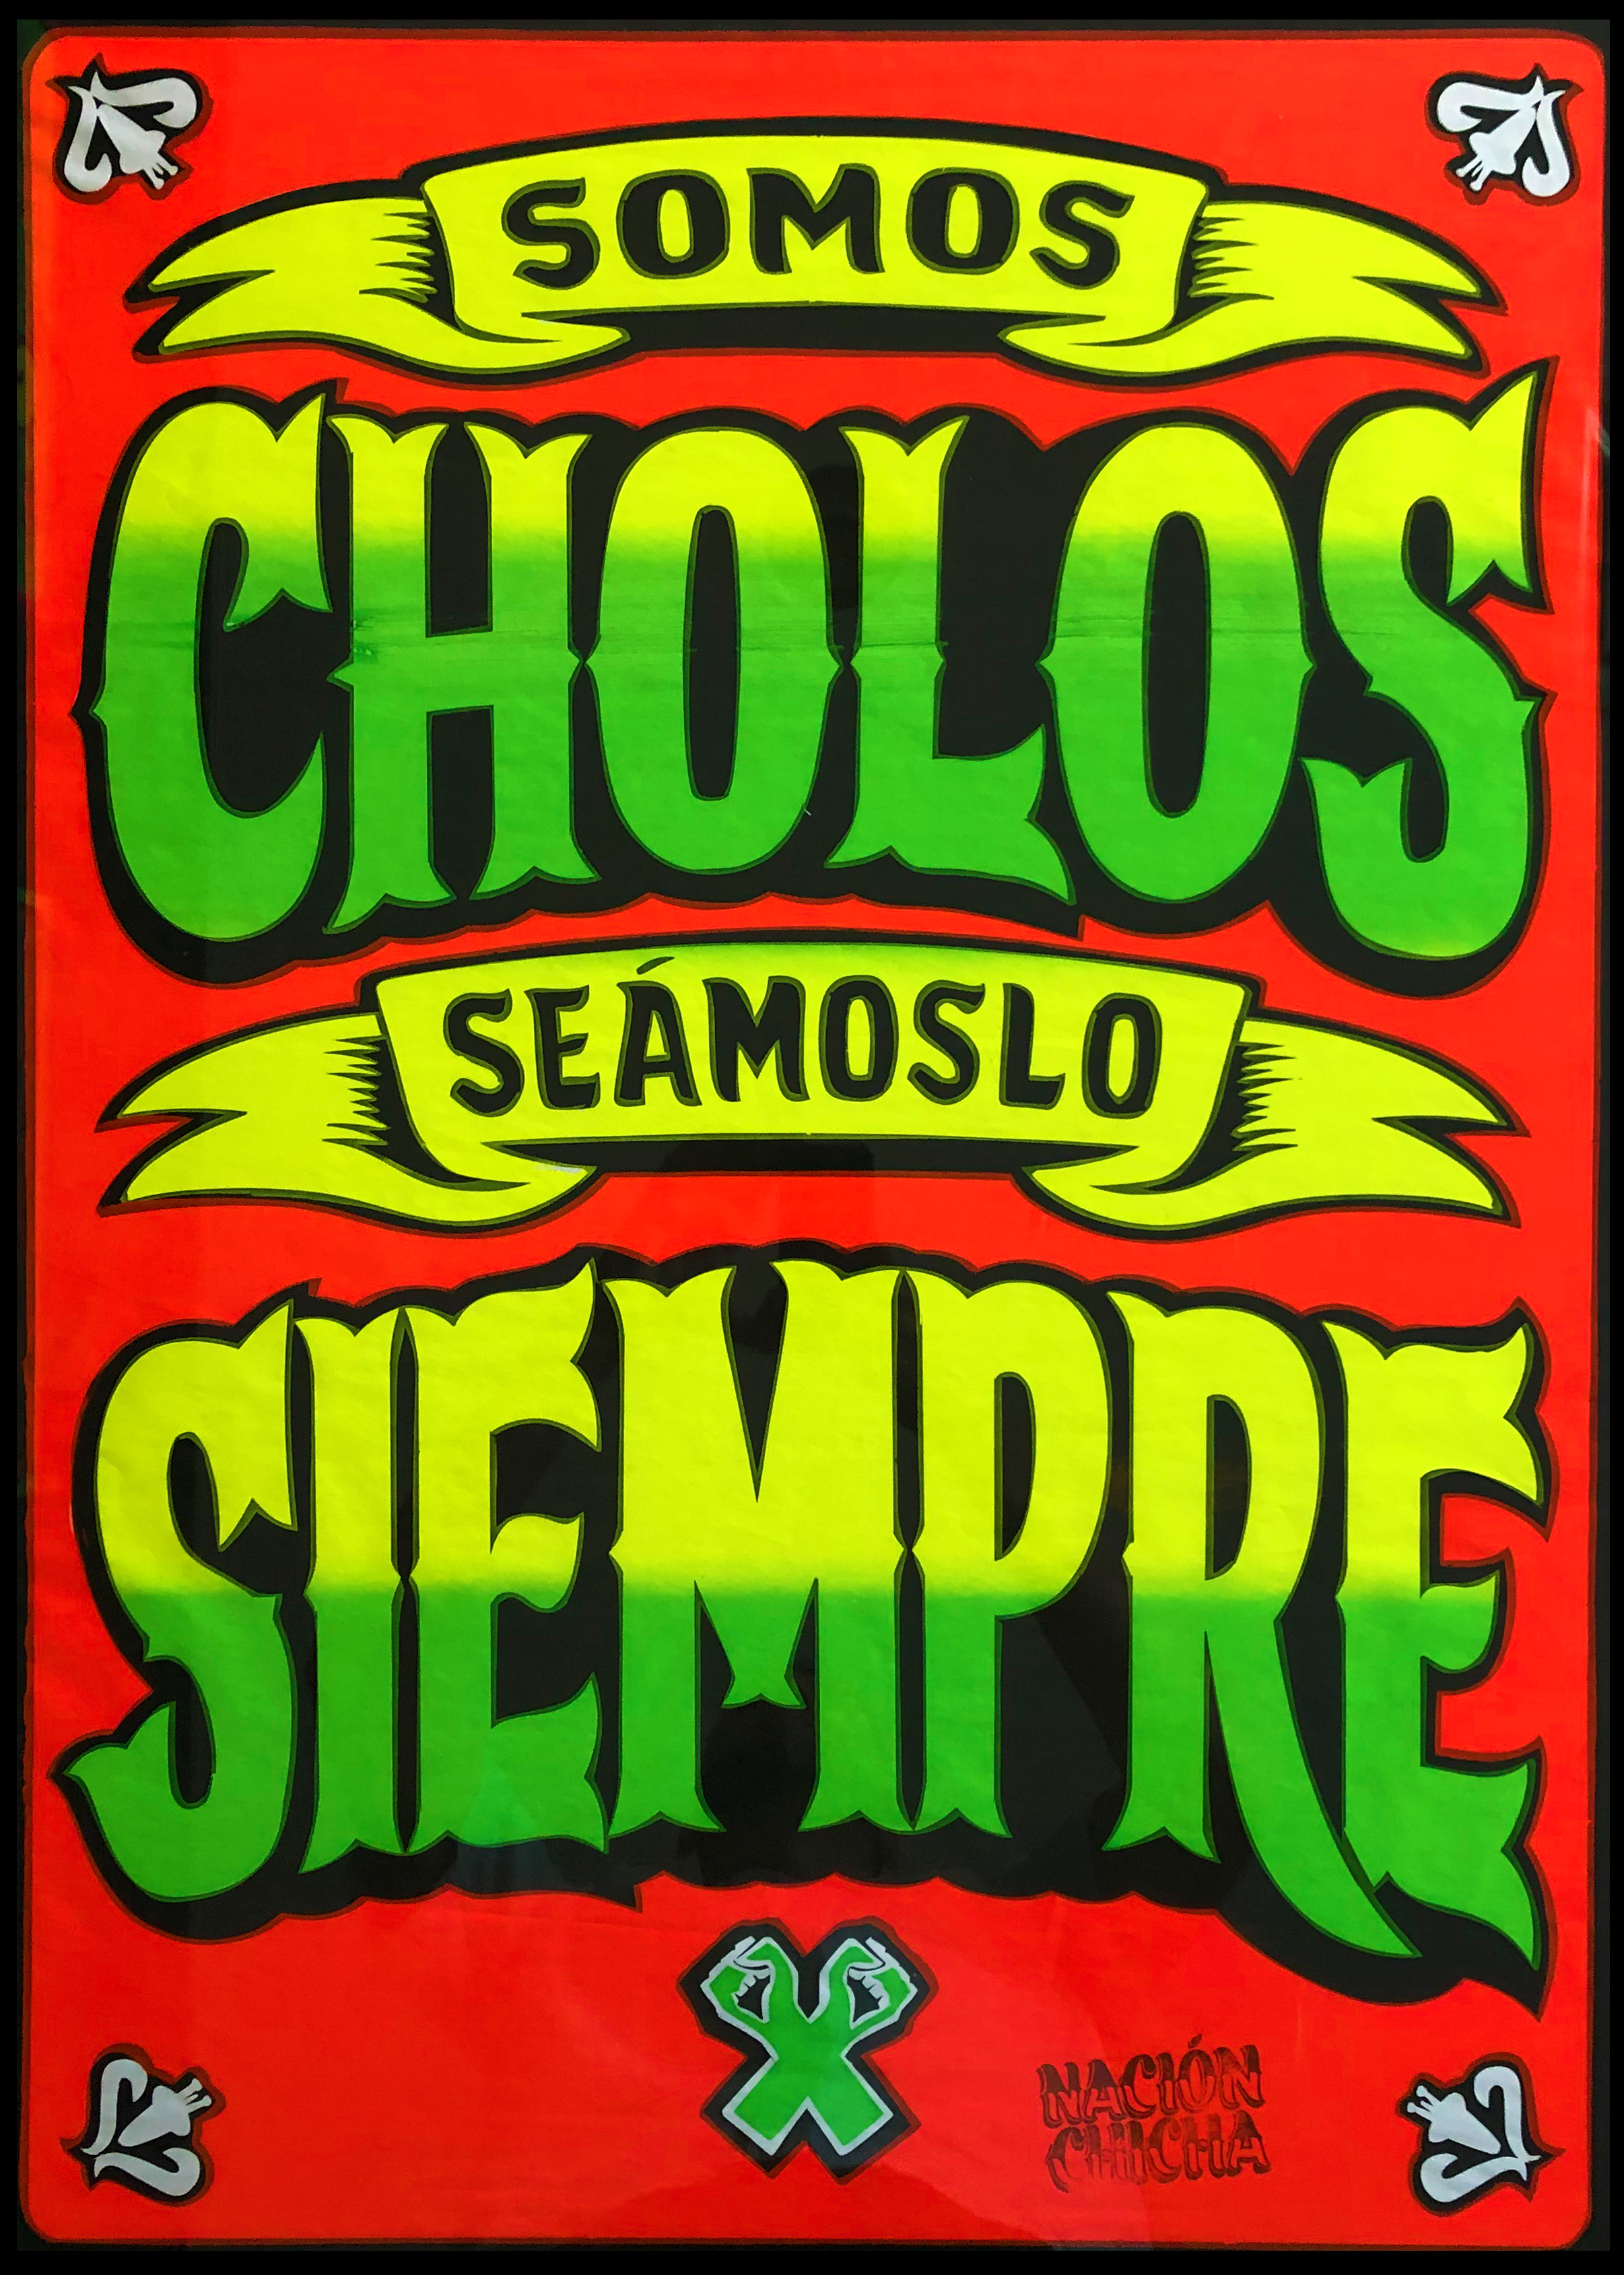 bright red poster with green and yellow block text that reads "SOMOS CHOLOS. SEAMOSLO SIEMPRE"